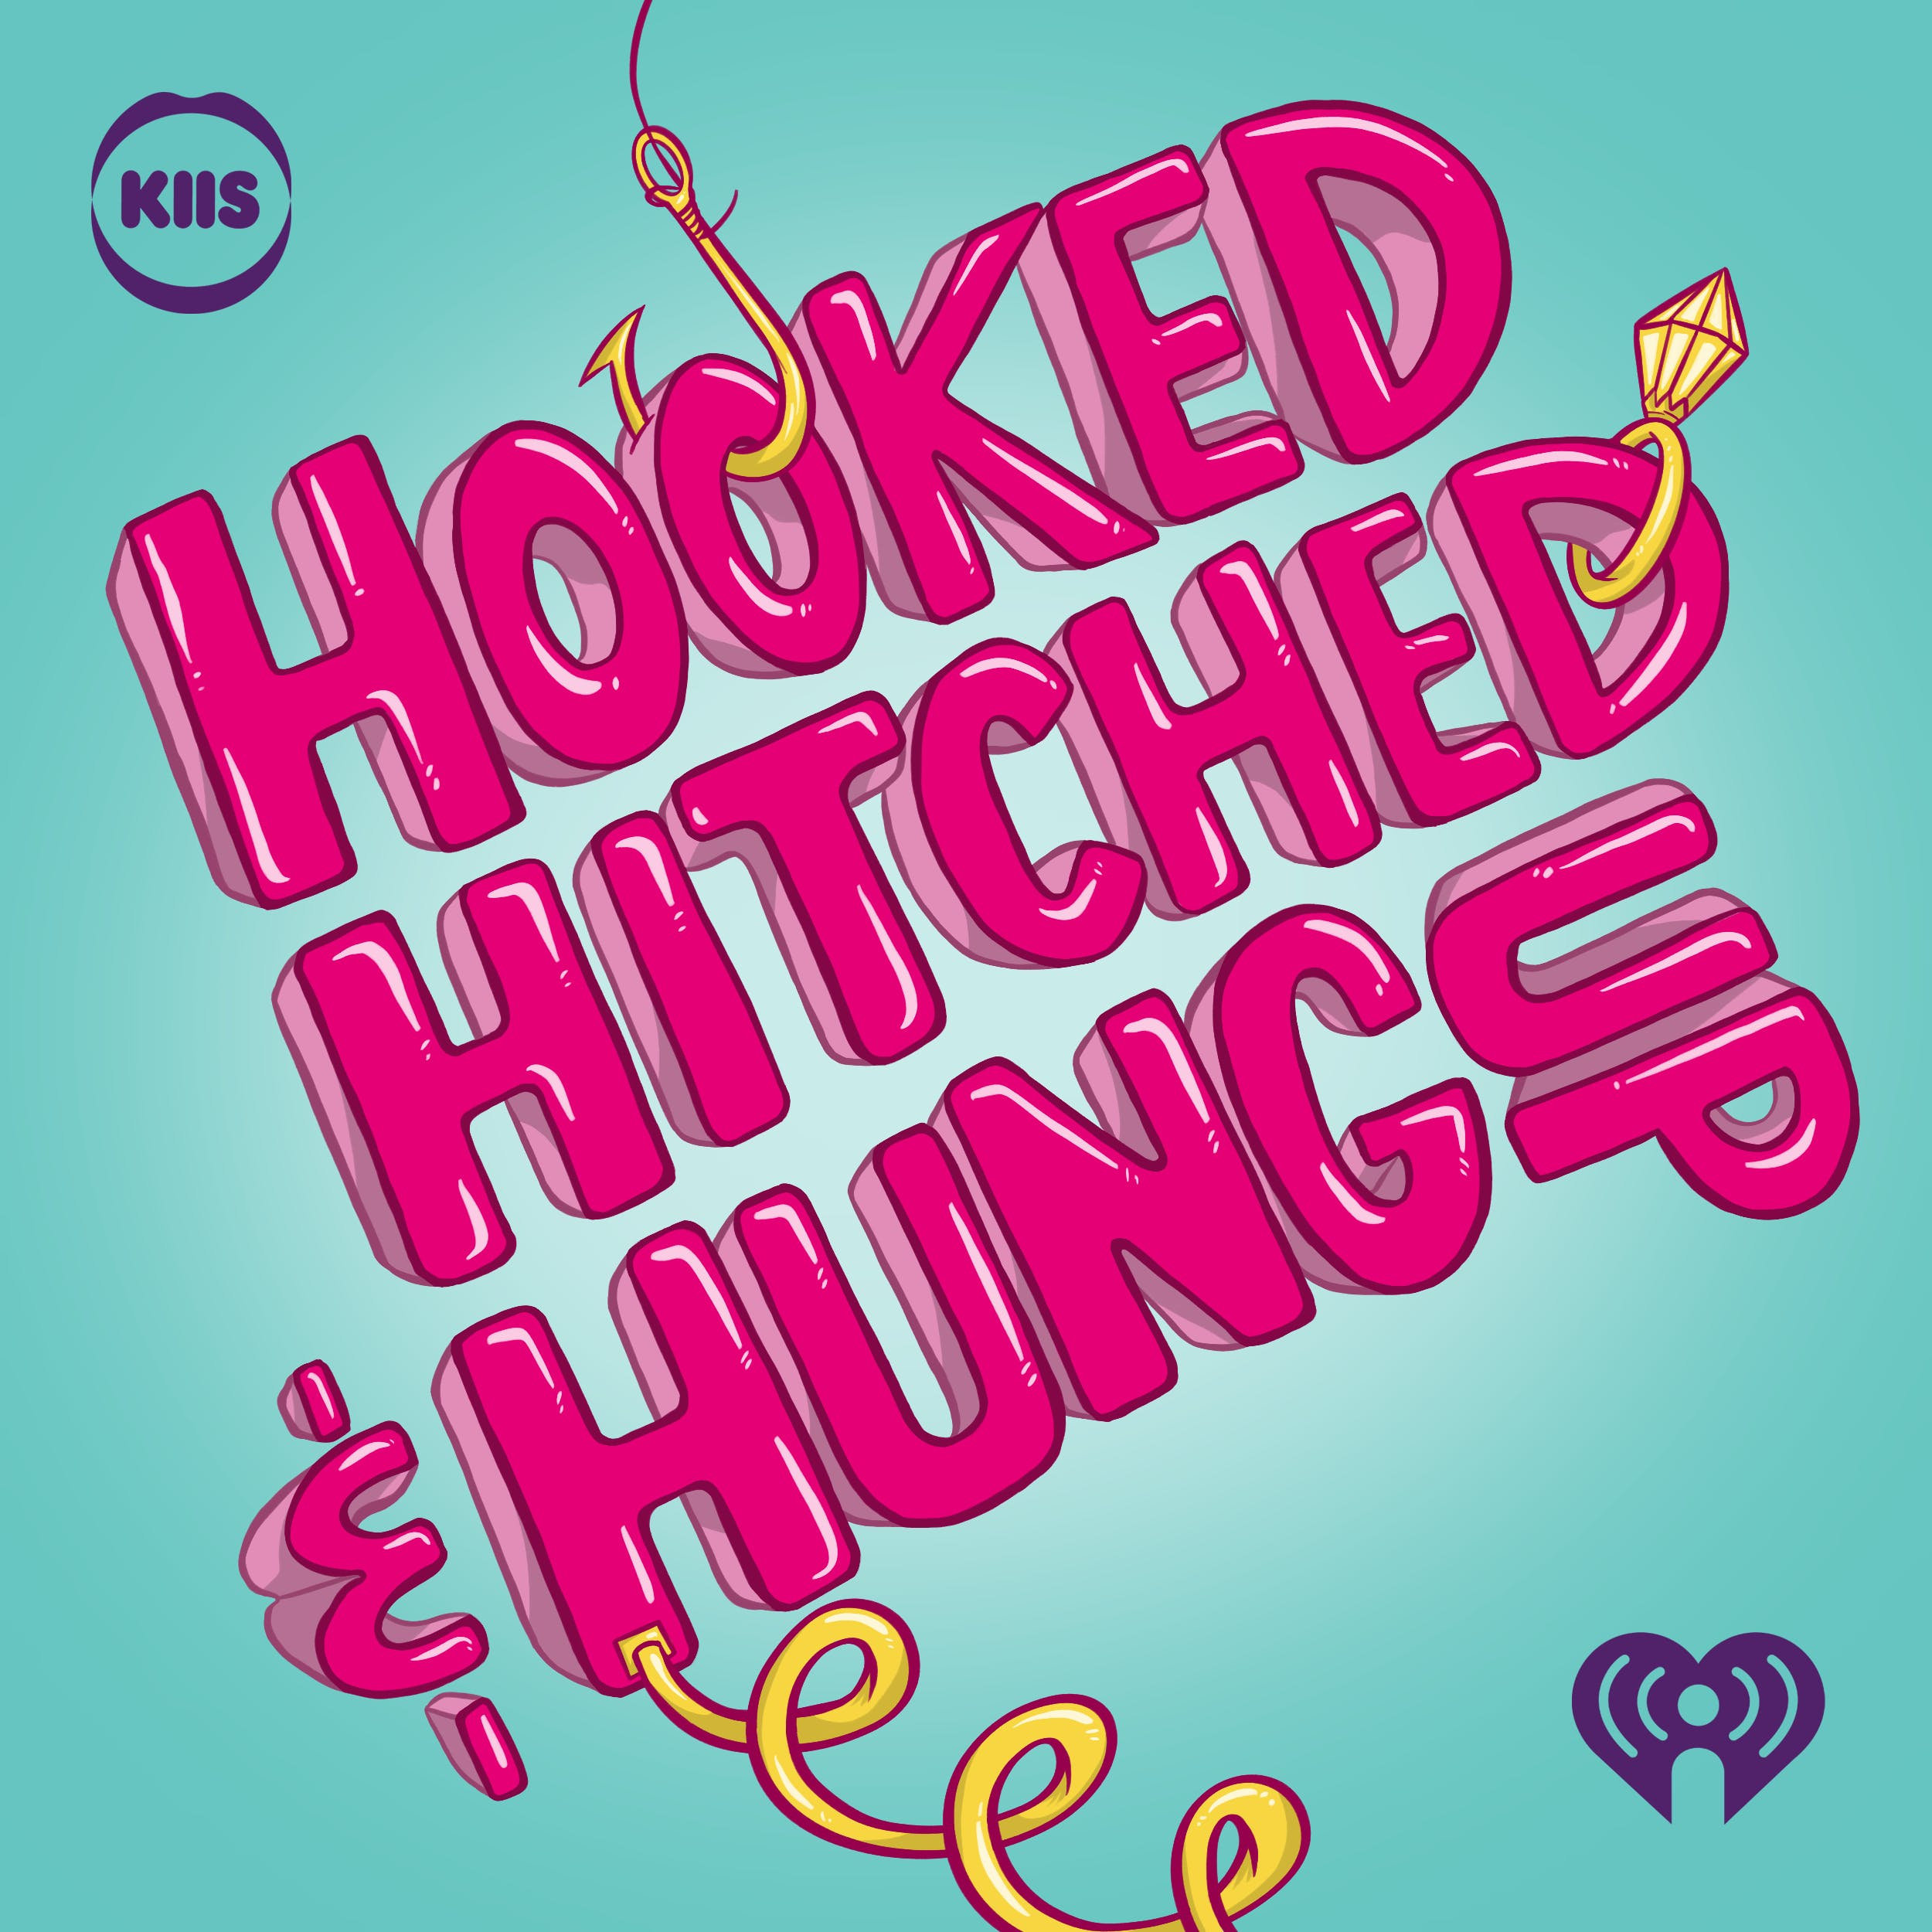 🥁 Introducing....Hooked, Hitched and Hung Up